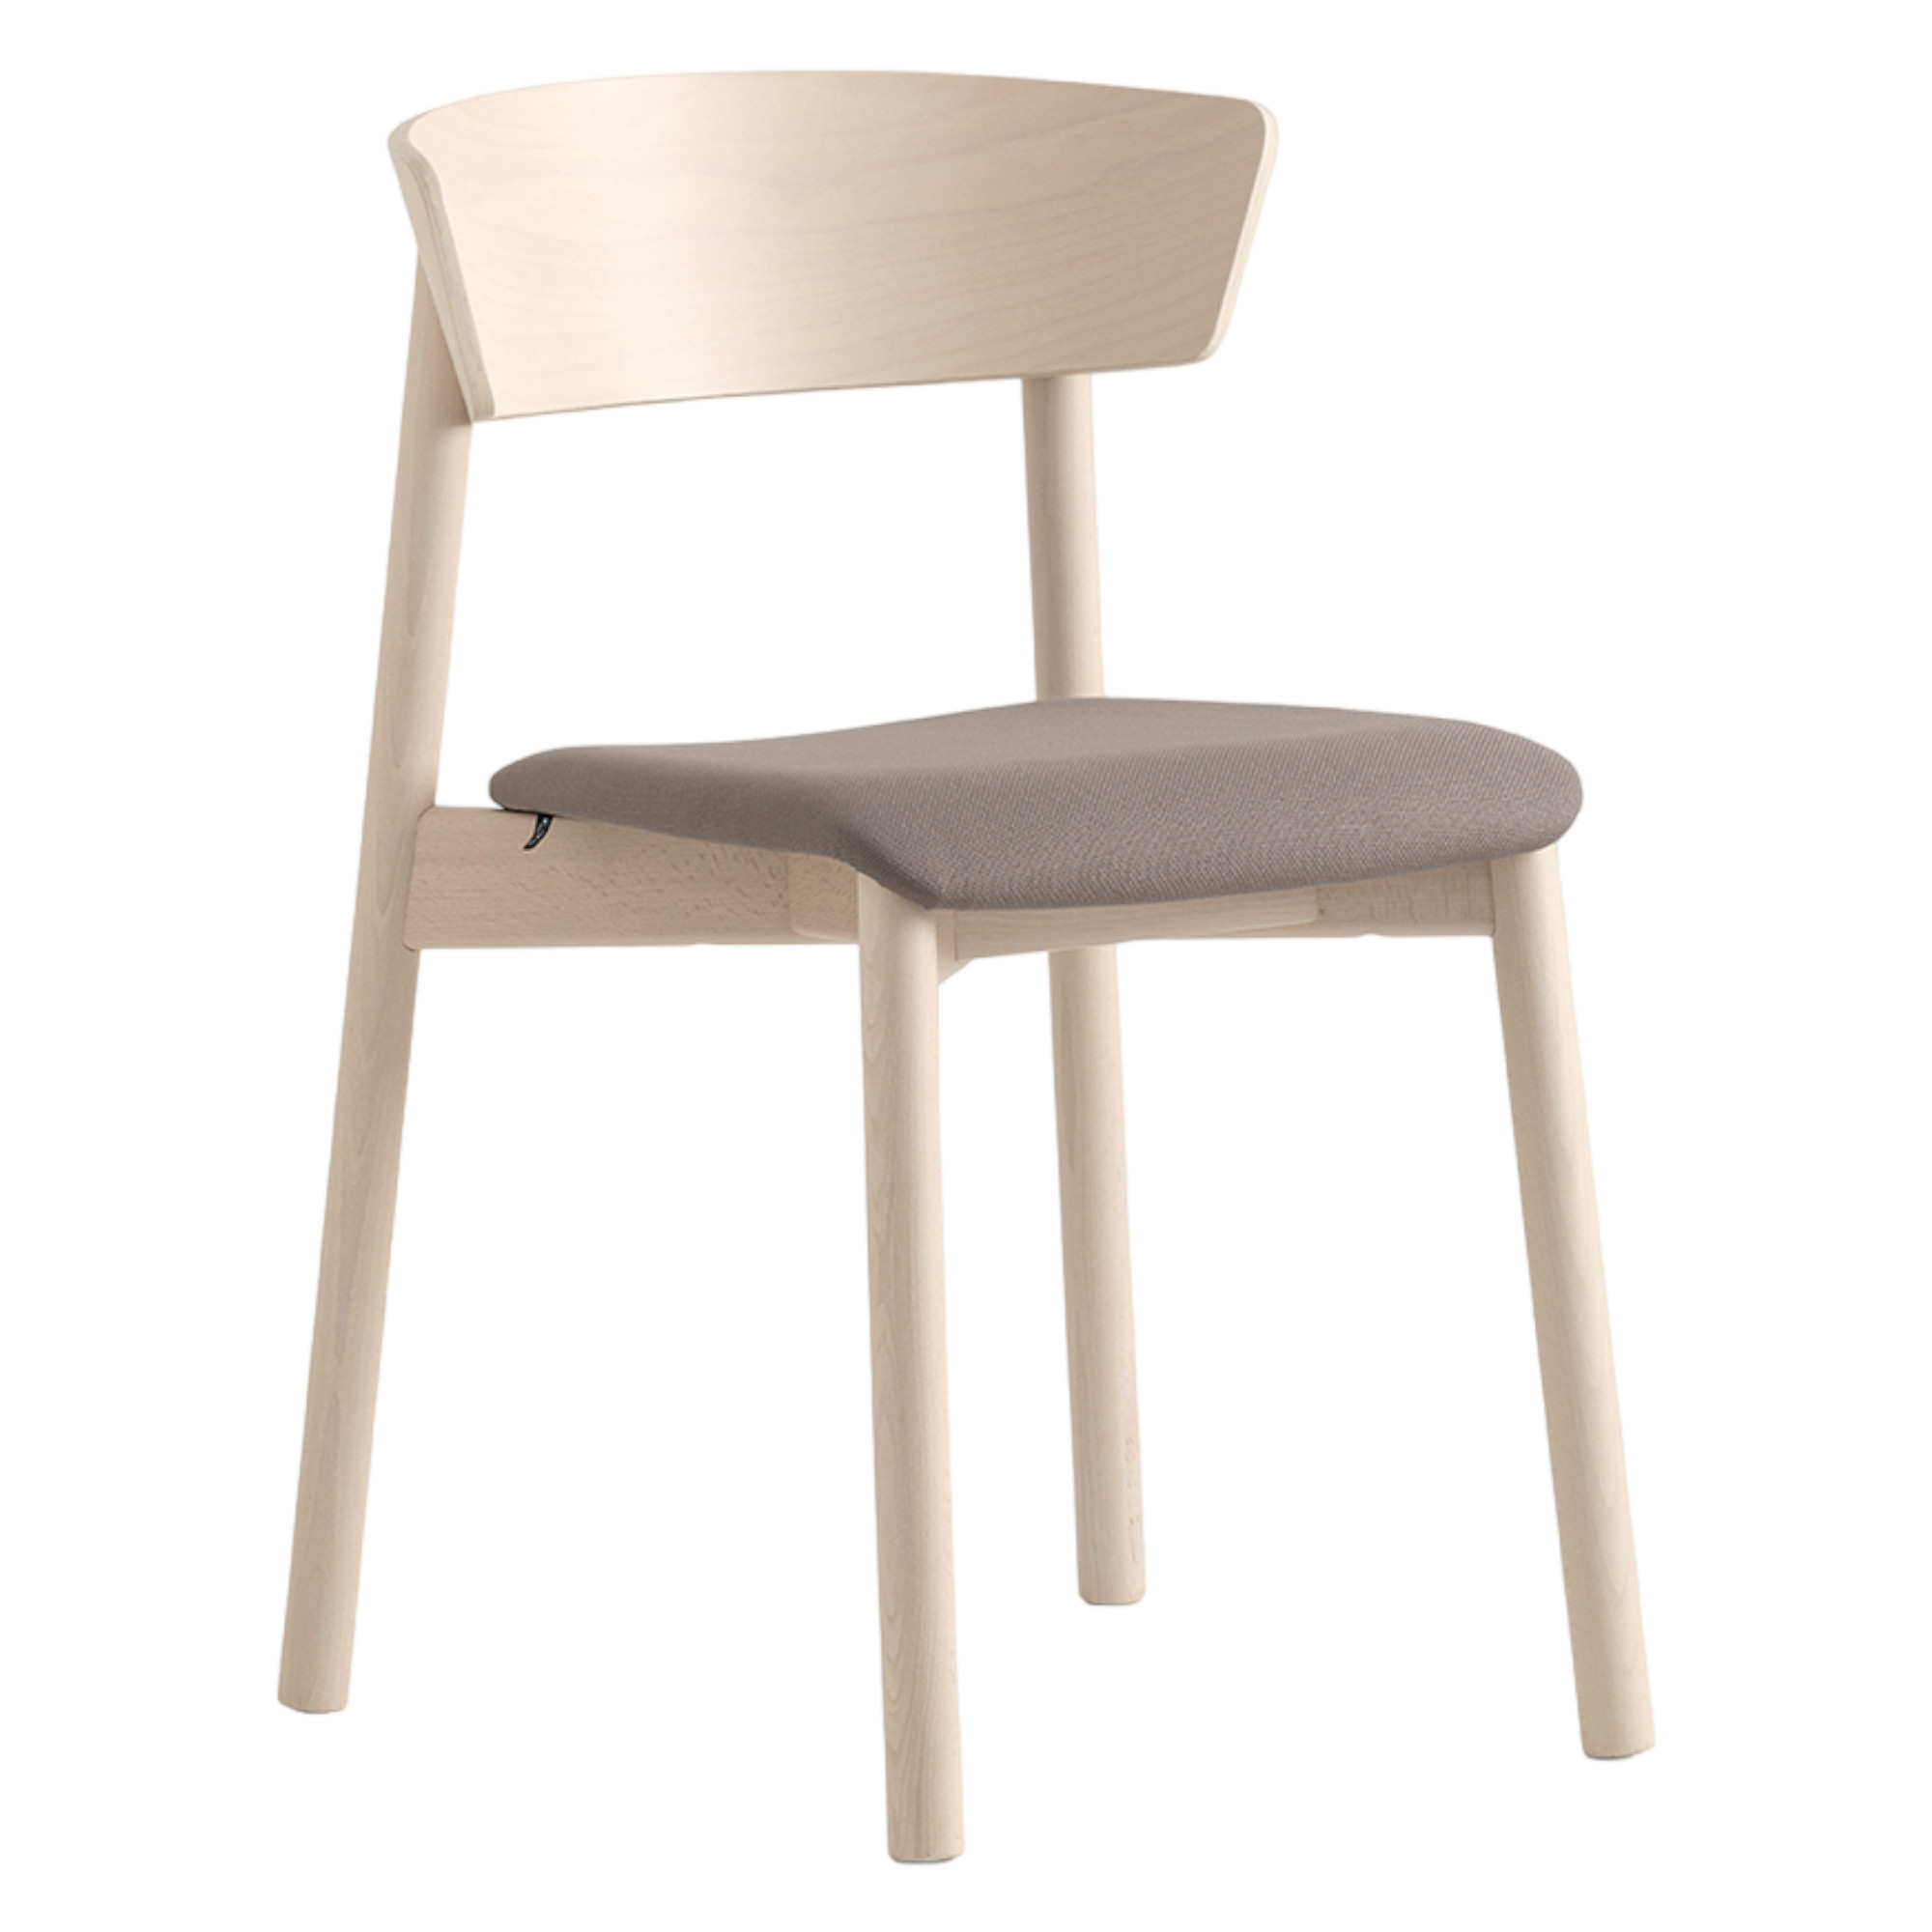 CLELIA COVERED CHAIR CB/2120 | Chairs | Seats | CONNUBIA - Masonionline